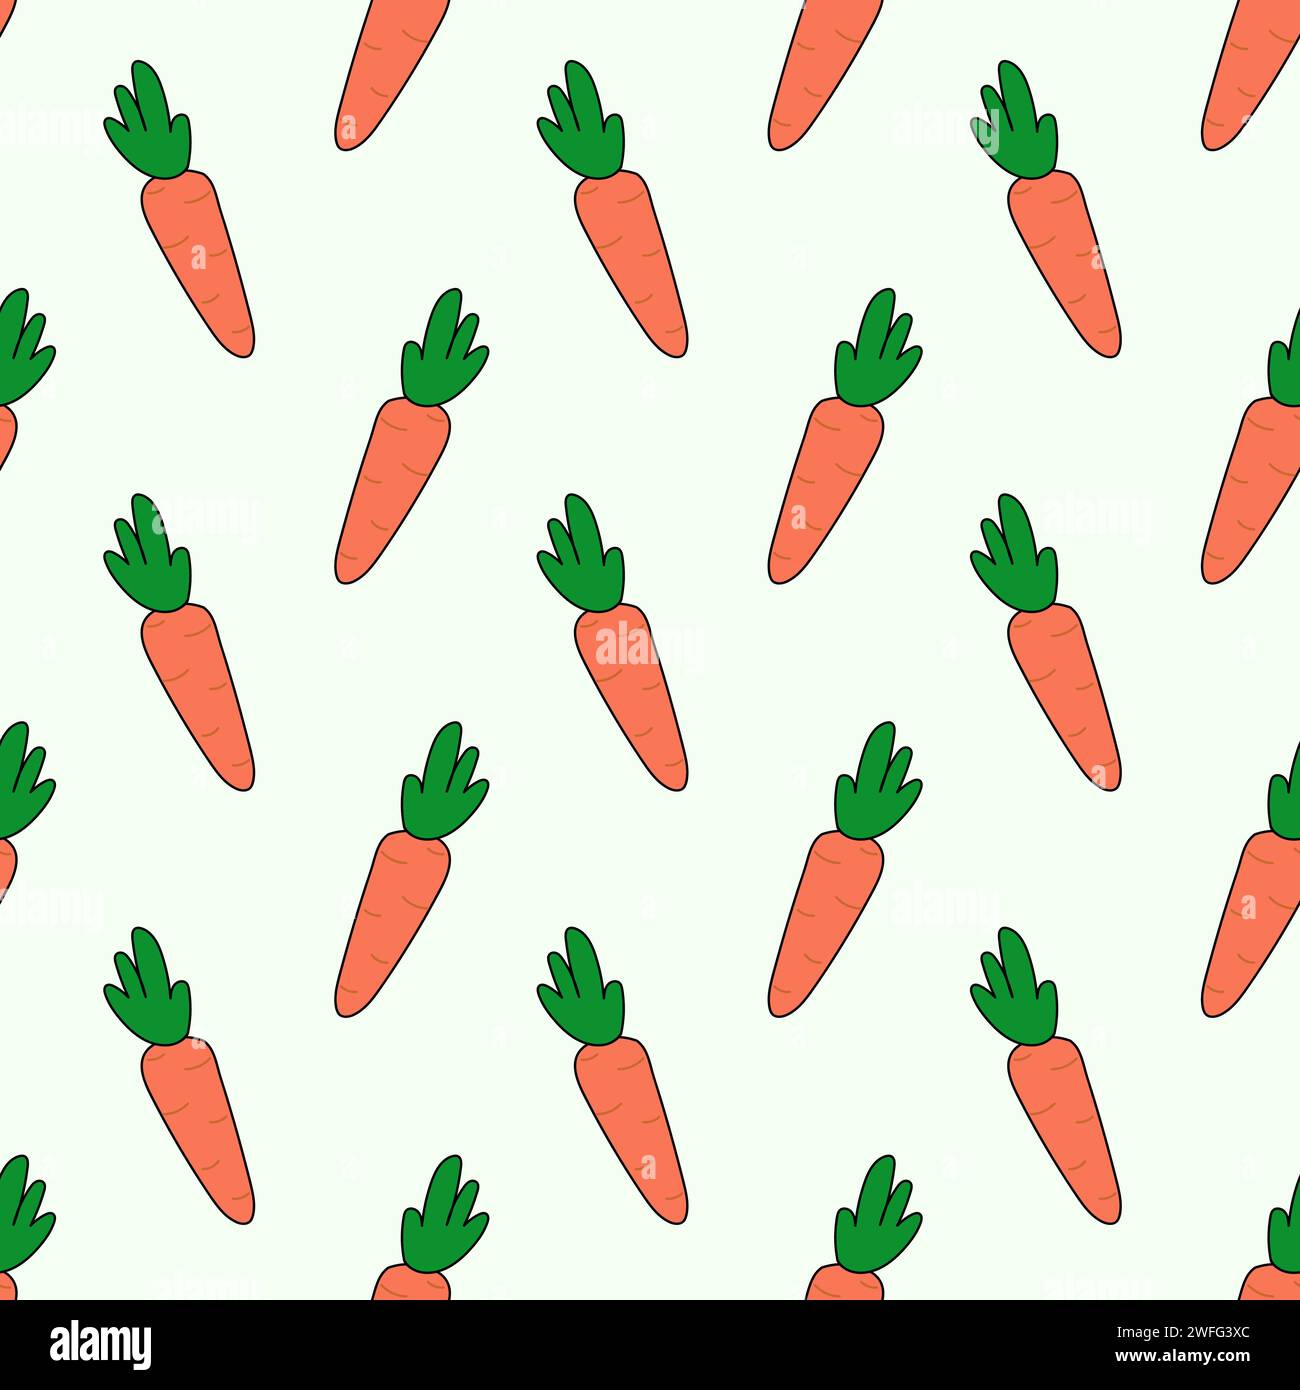 Seamless pattern with carrot. Vegetable background. Vector flat illustration of healthy vegan food wallpaper. Stock Vector